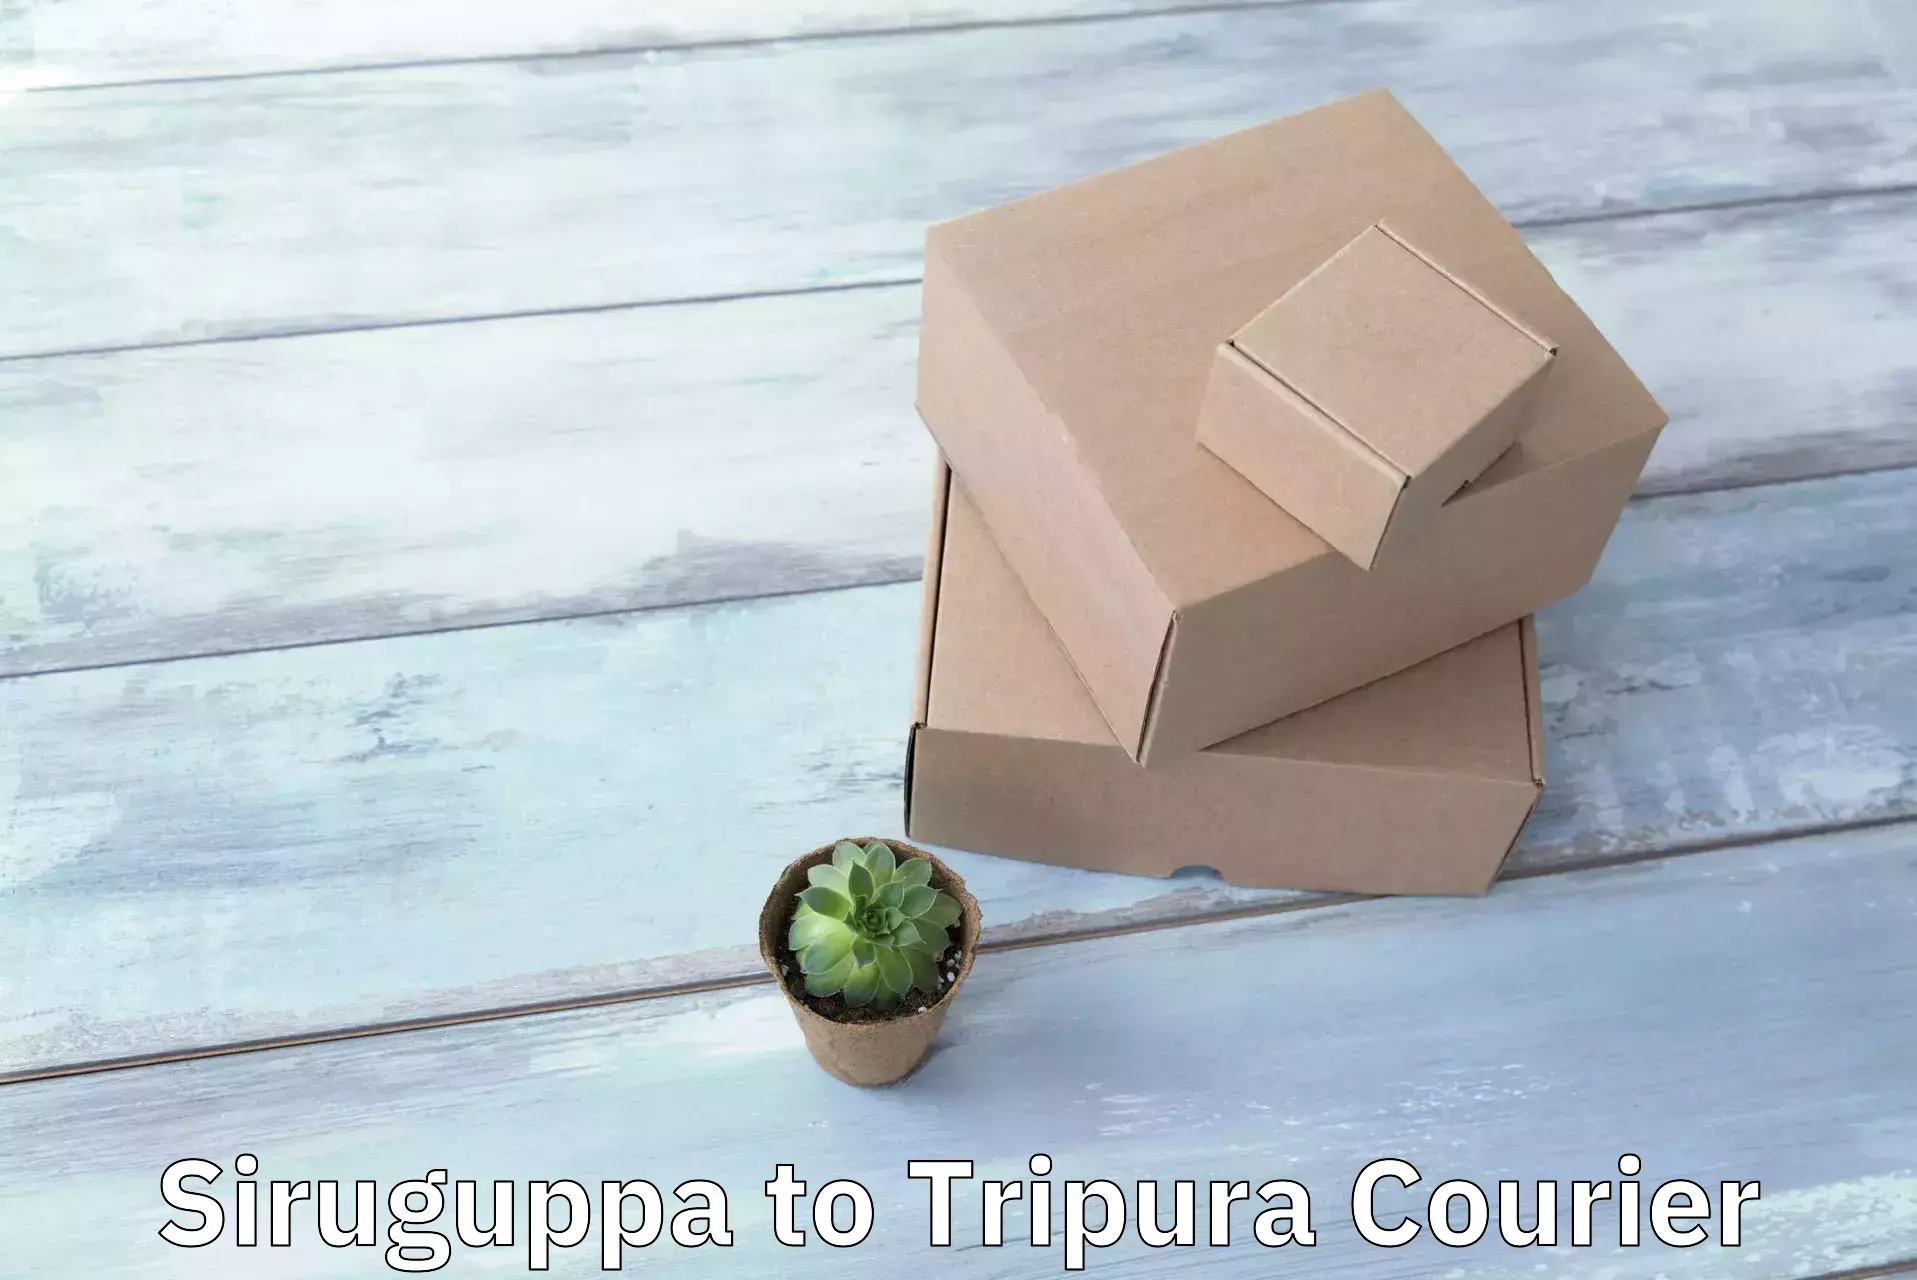 Same-day delivery options Siruguppa to Udaipur Tripura